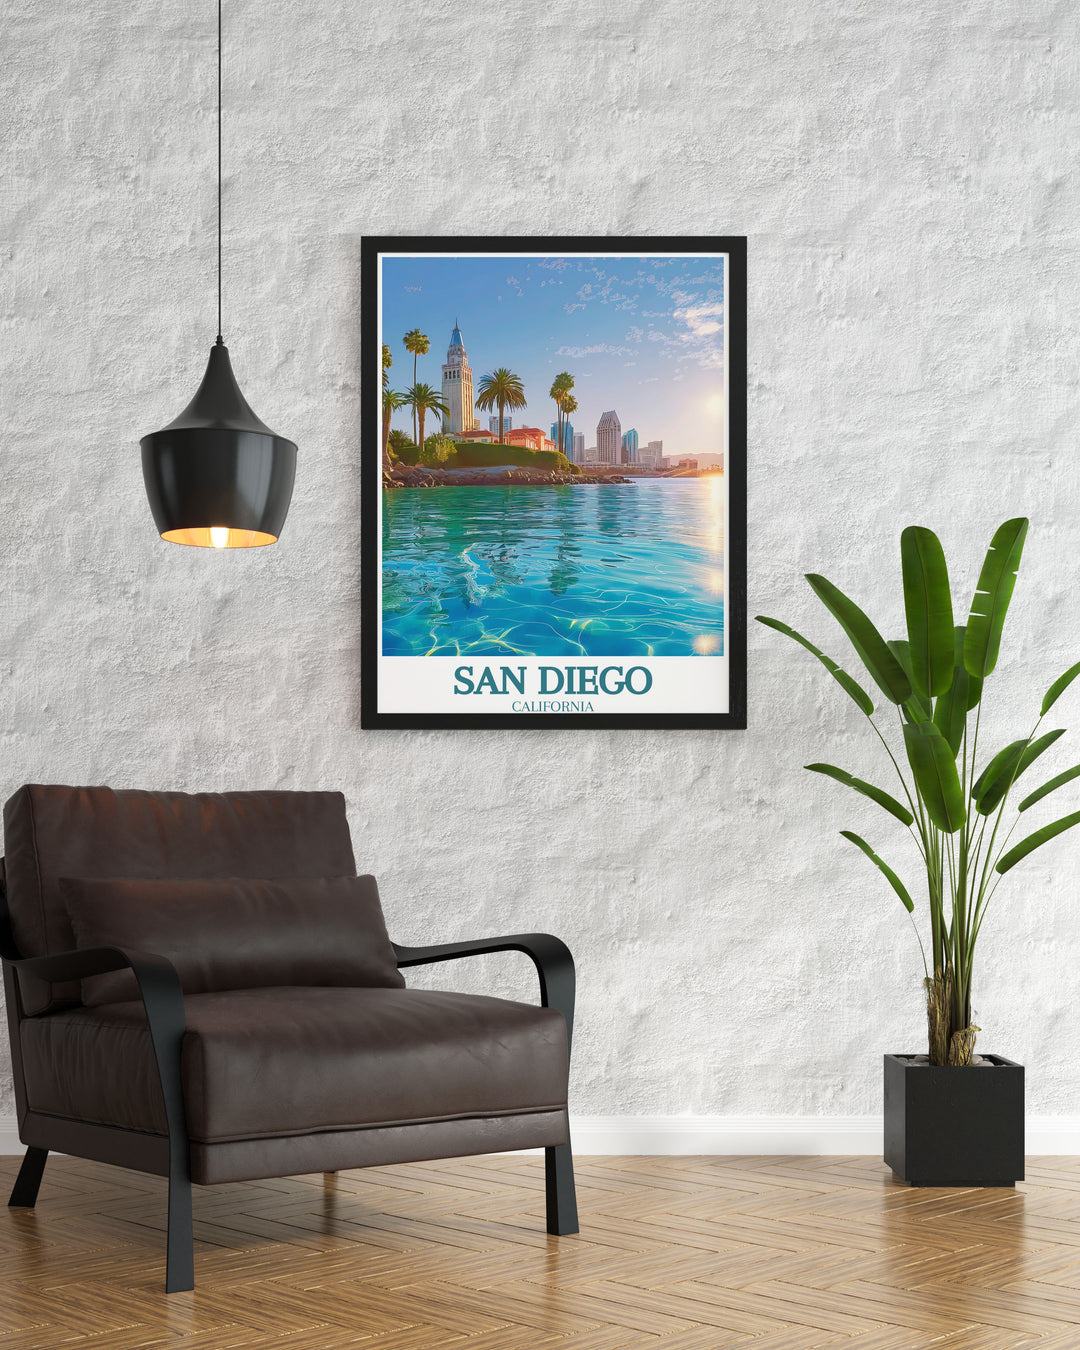 Unique San Diego beach artwork perfect for California decor enthusiasts. This beautiful print showcases the iconic views of the beach, making it an excellent gift for anyone who loves the charm and beauty of San Diego. Add coastal elegance to any room.